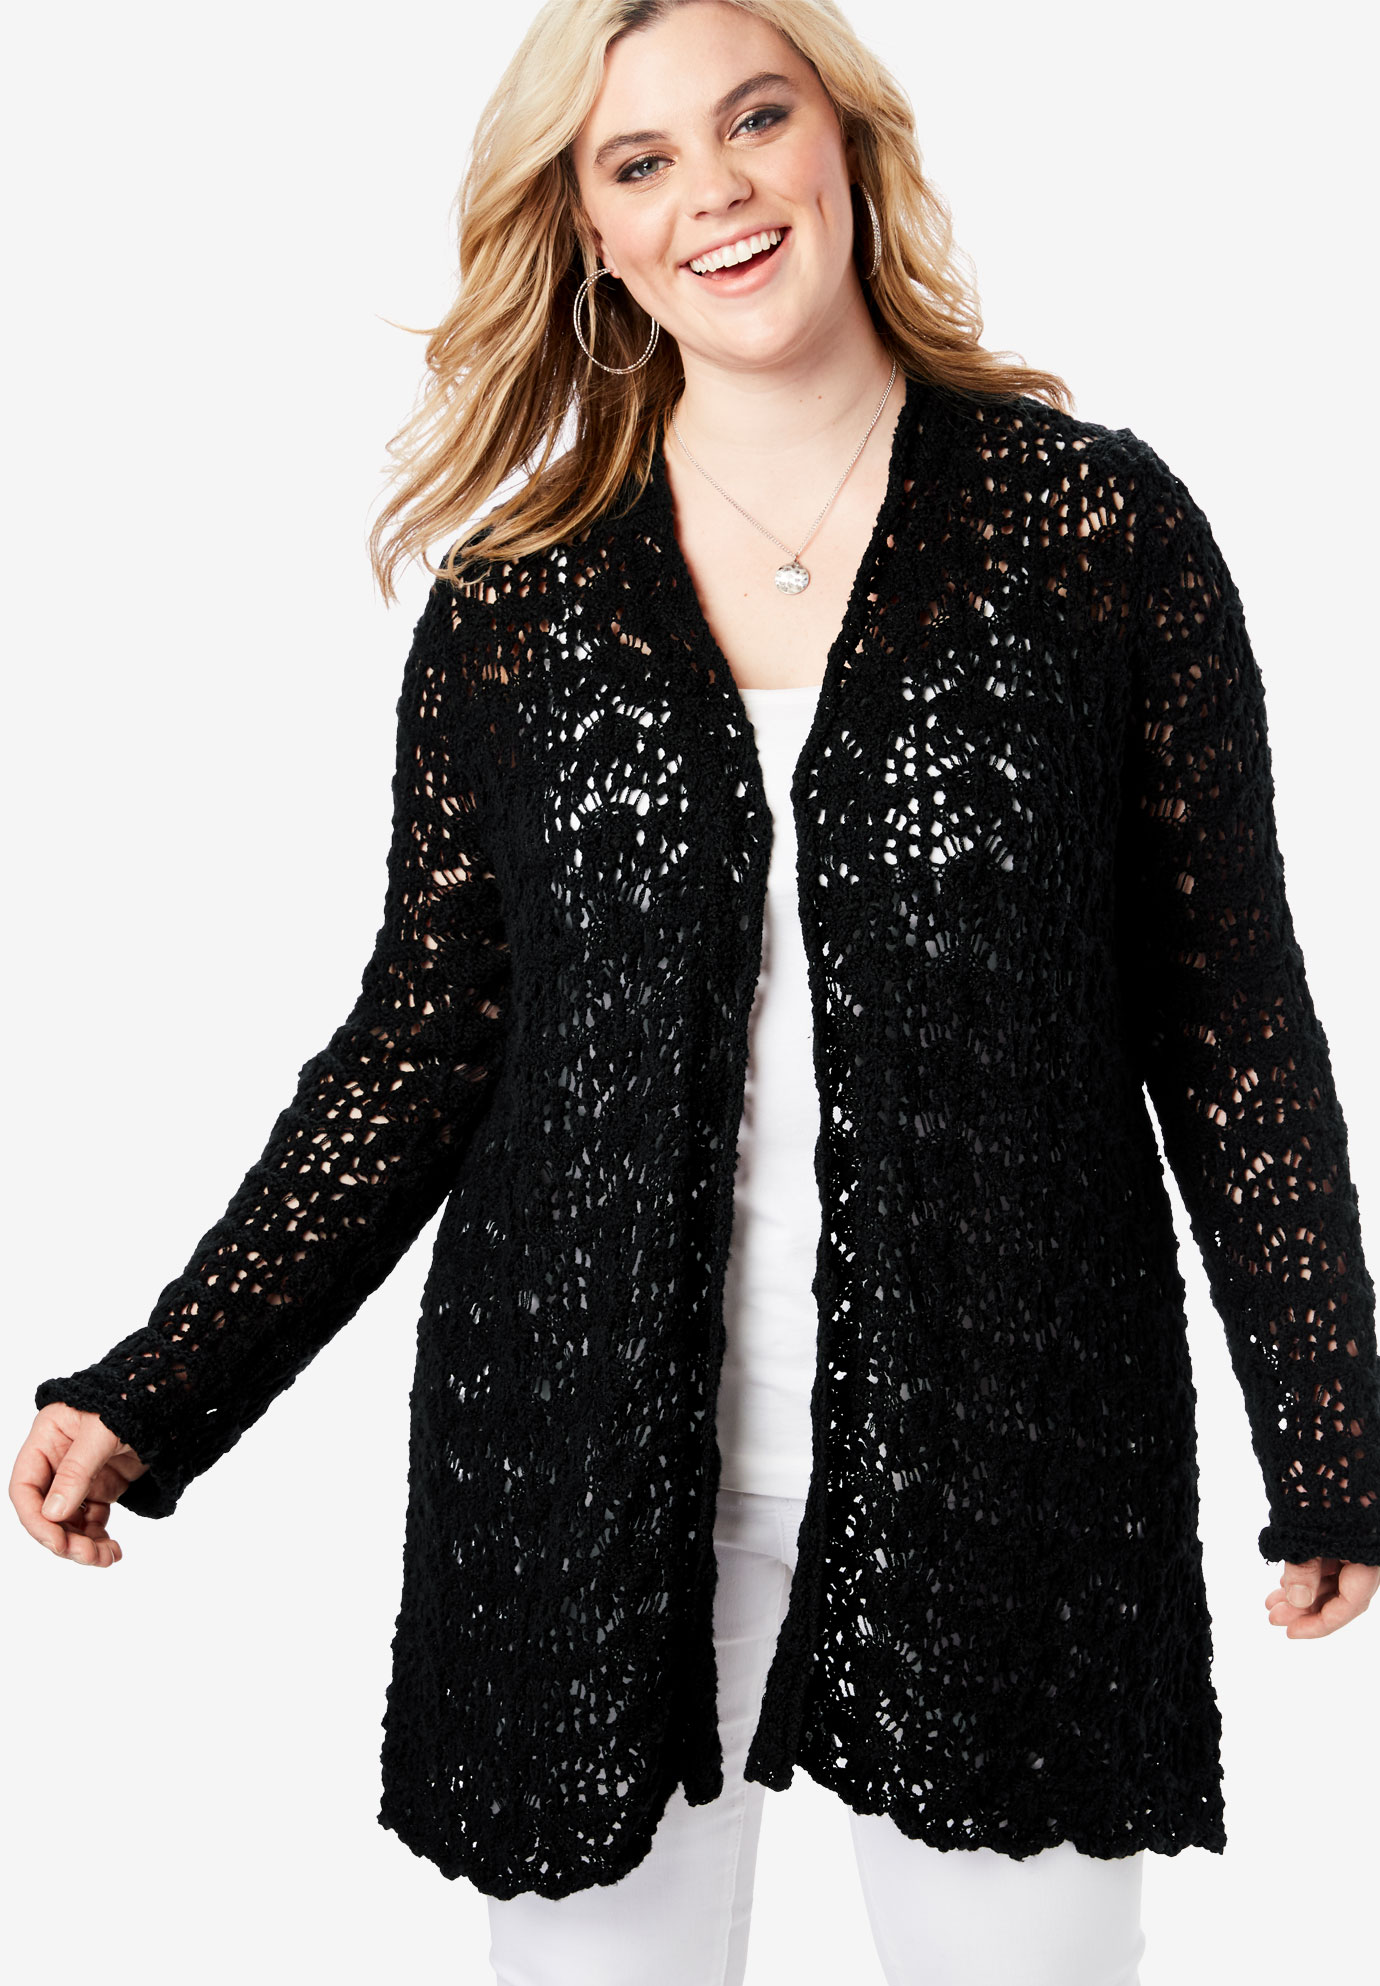 Crochet Cardigan Plus Size Cardigans Woman Within 9584